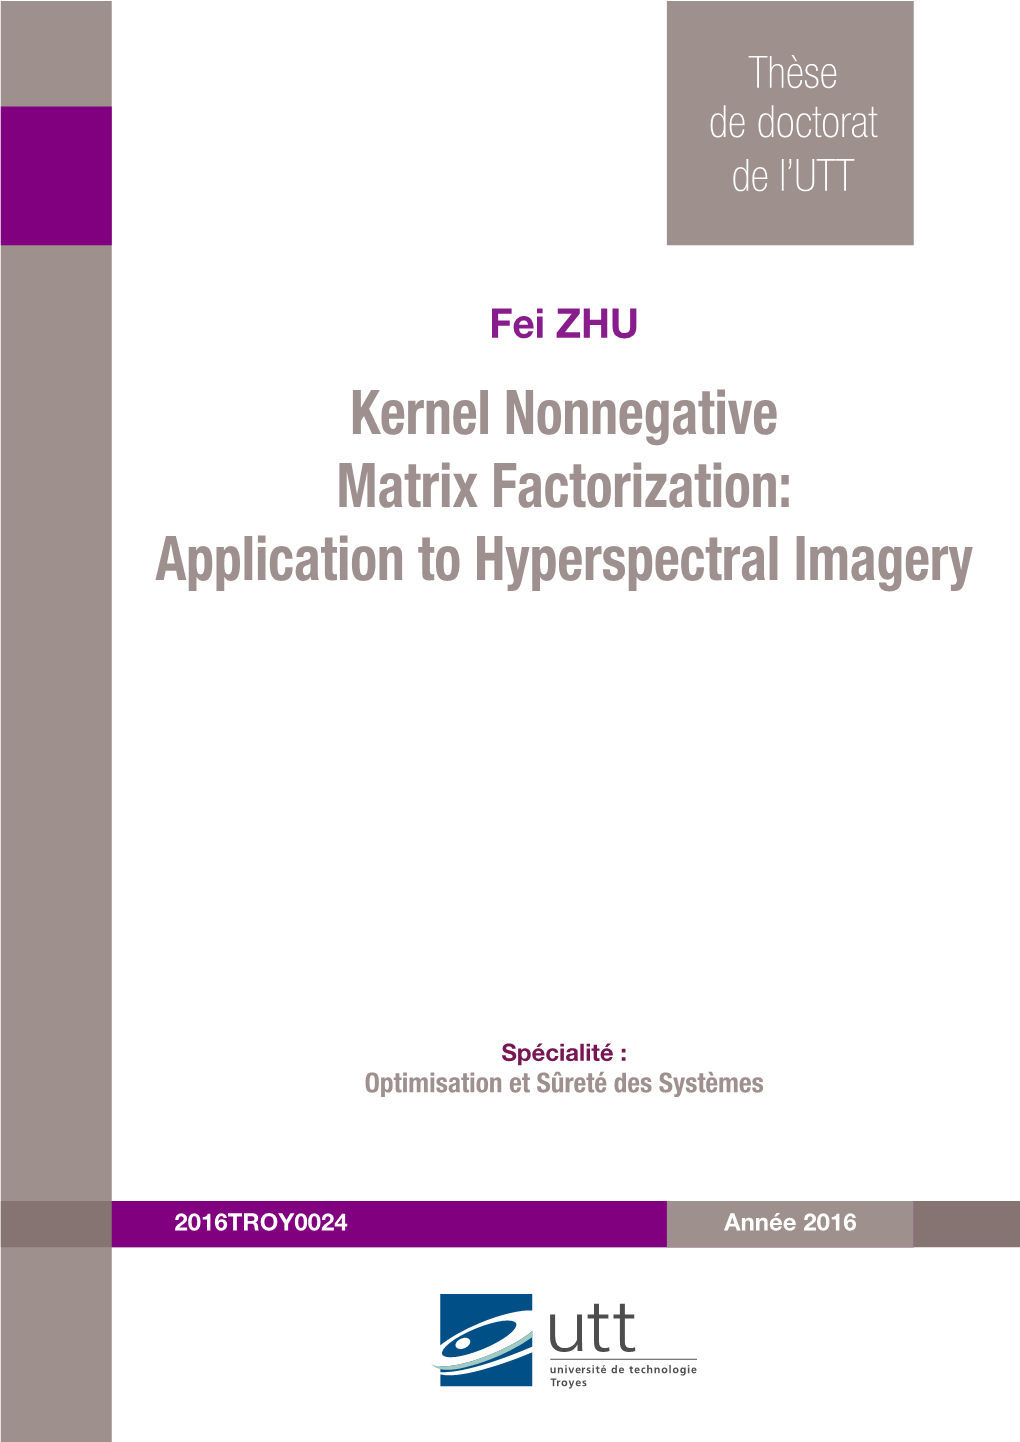 Kernel Nonnegative Matrix Factorization: Application to Hyperspectral Imagery